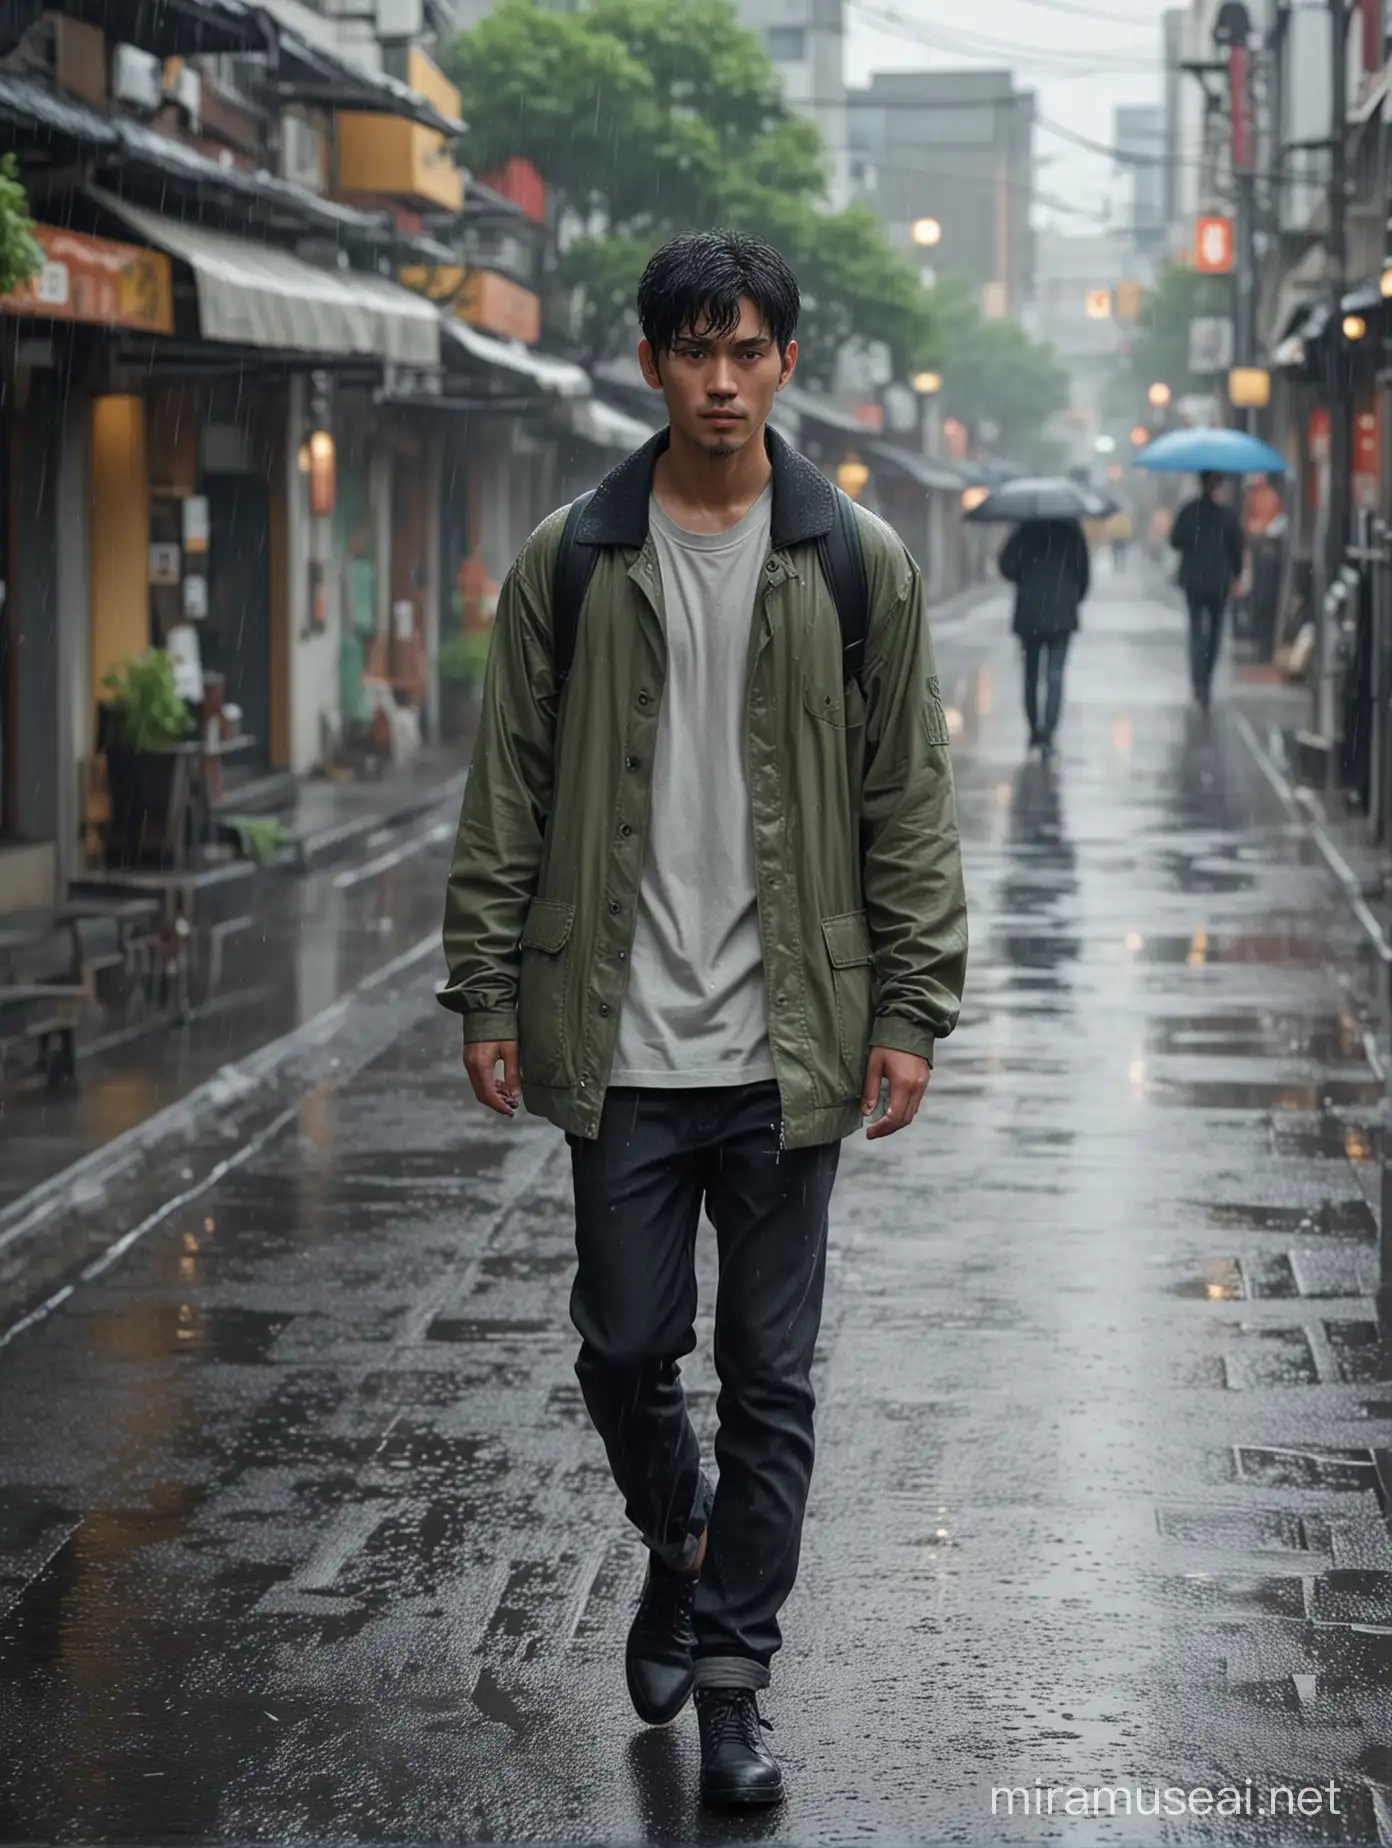 a man walking down a wet street at afternoon, Japanese model, wearing a sage t-shirt and jaket,  short black hair, walking to the right, at afternoon with rain, realistic, highly detailed, 8K, UHD